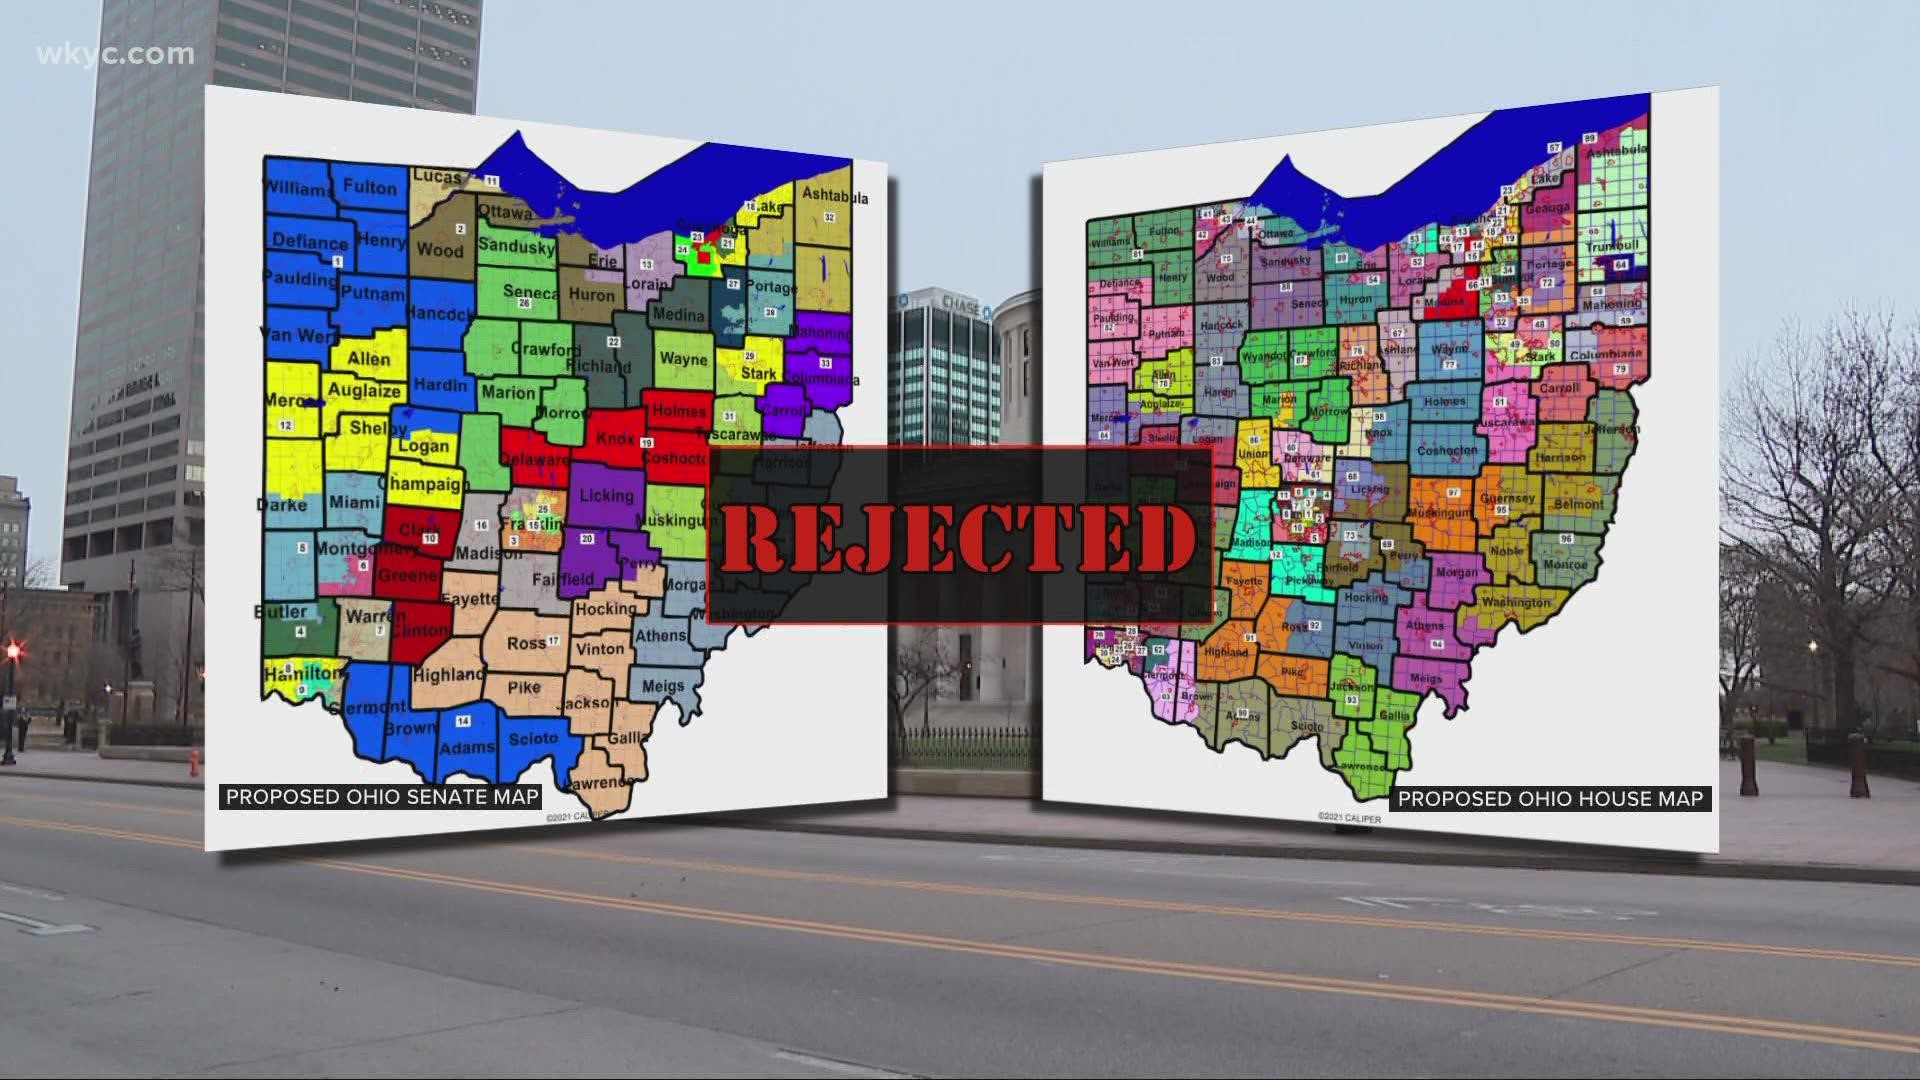 The commission is reviving maps previously declared unconstitutional by the Ohio Supreme Court. They are making adjustments to submit by the midnight deadline.